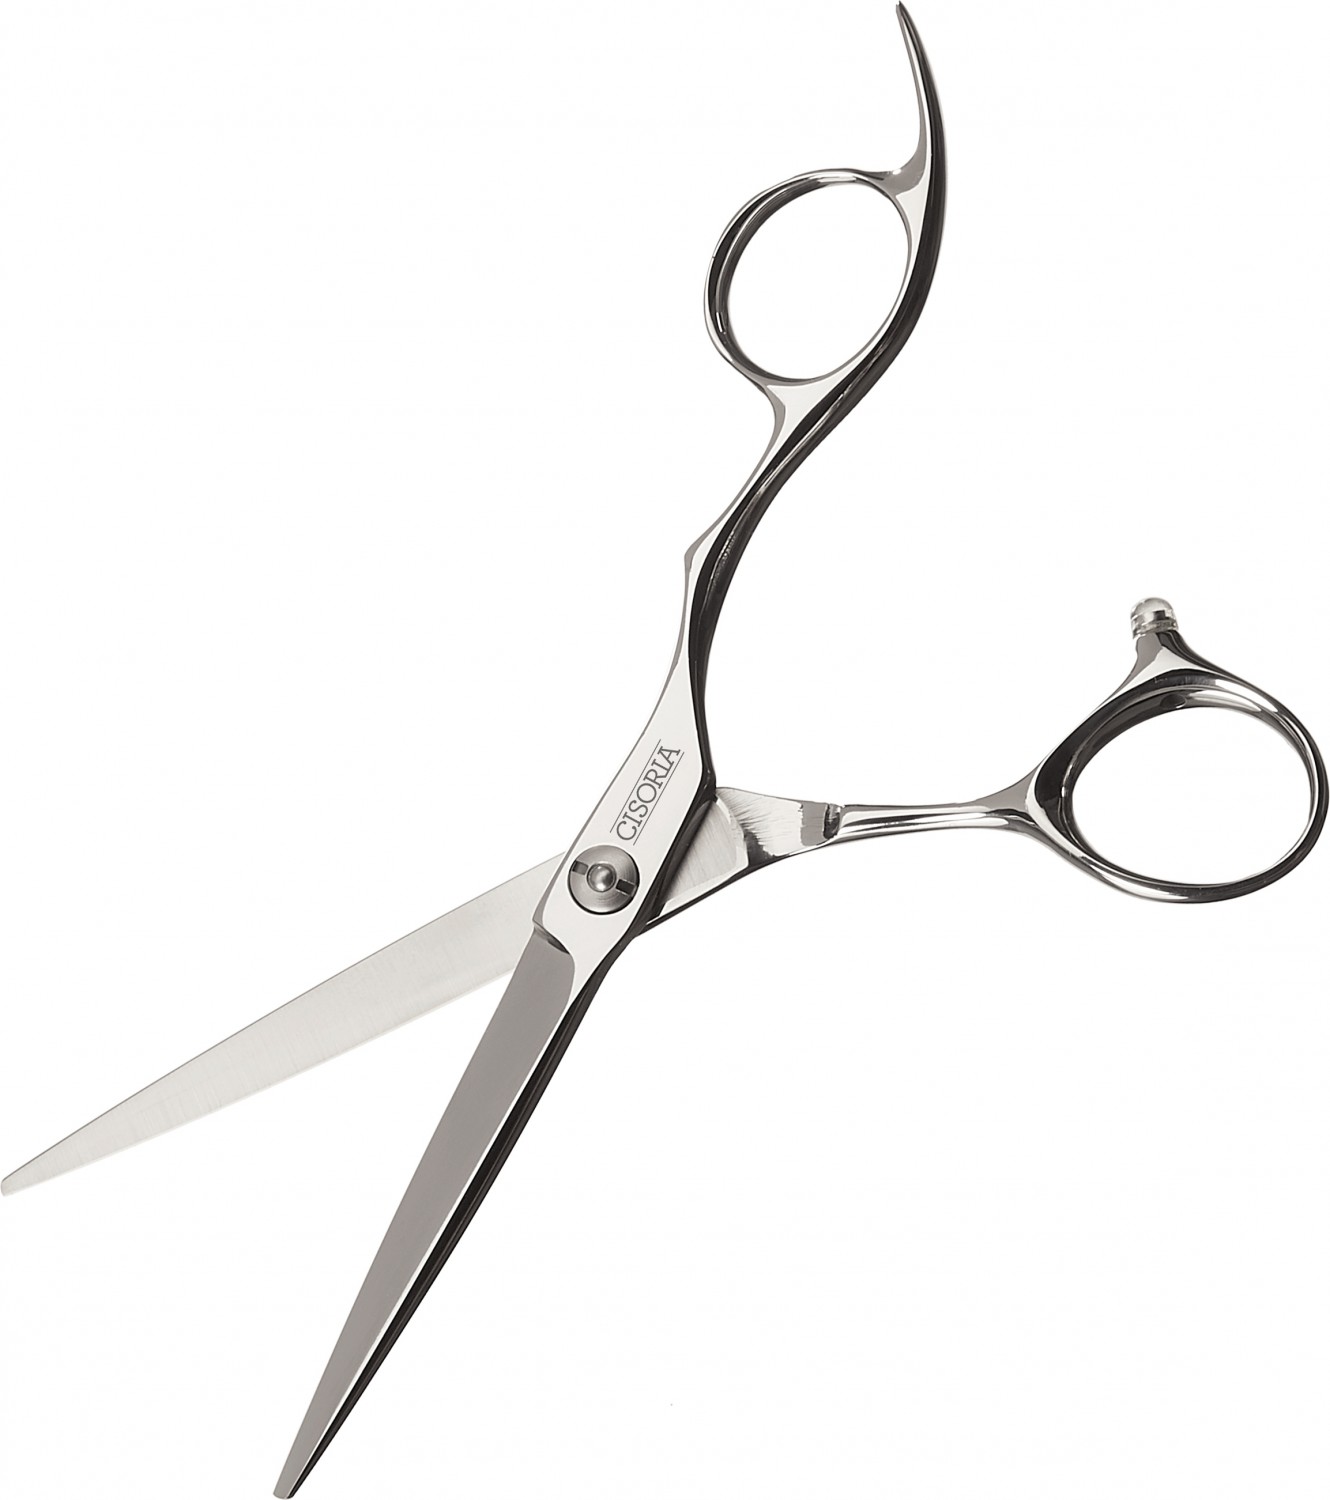  Cisoria Offset Cutting Scissors 7" Series O by Sibel 